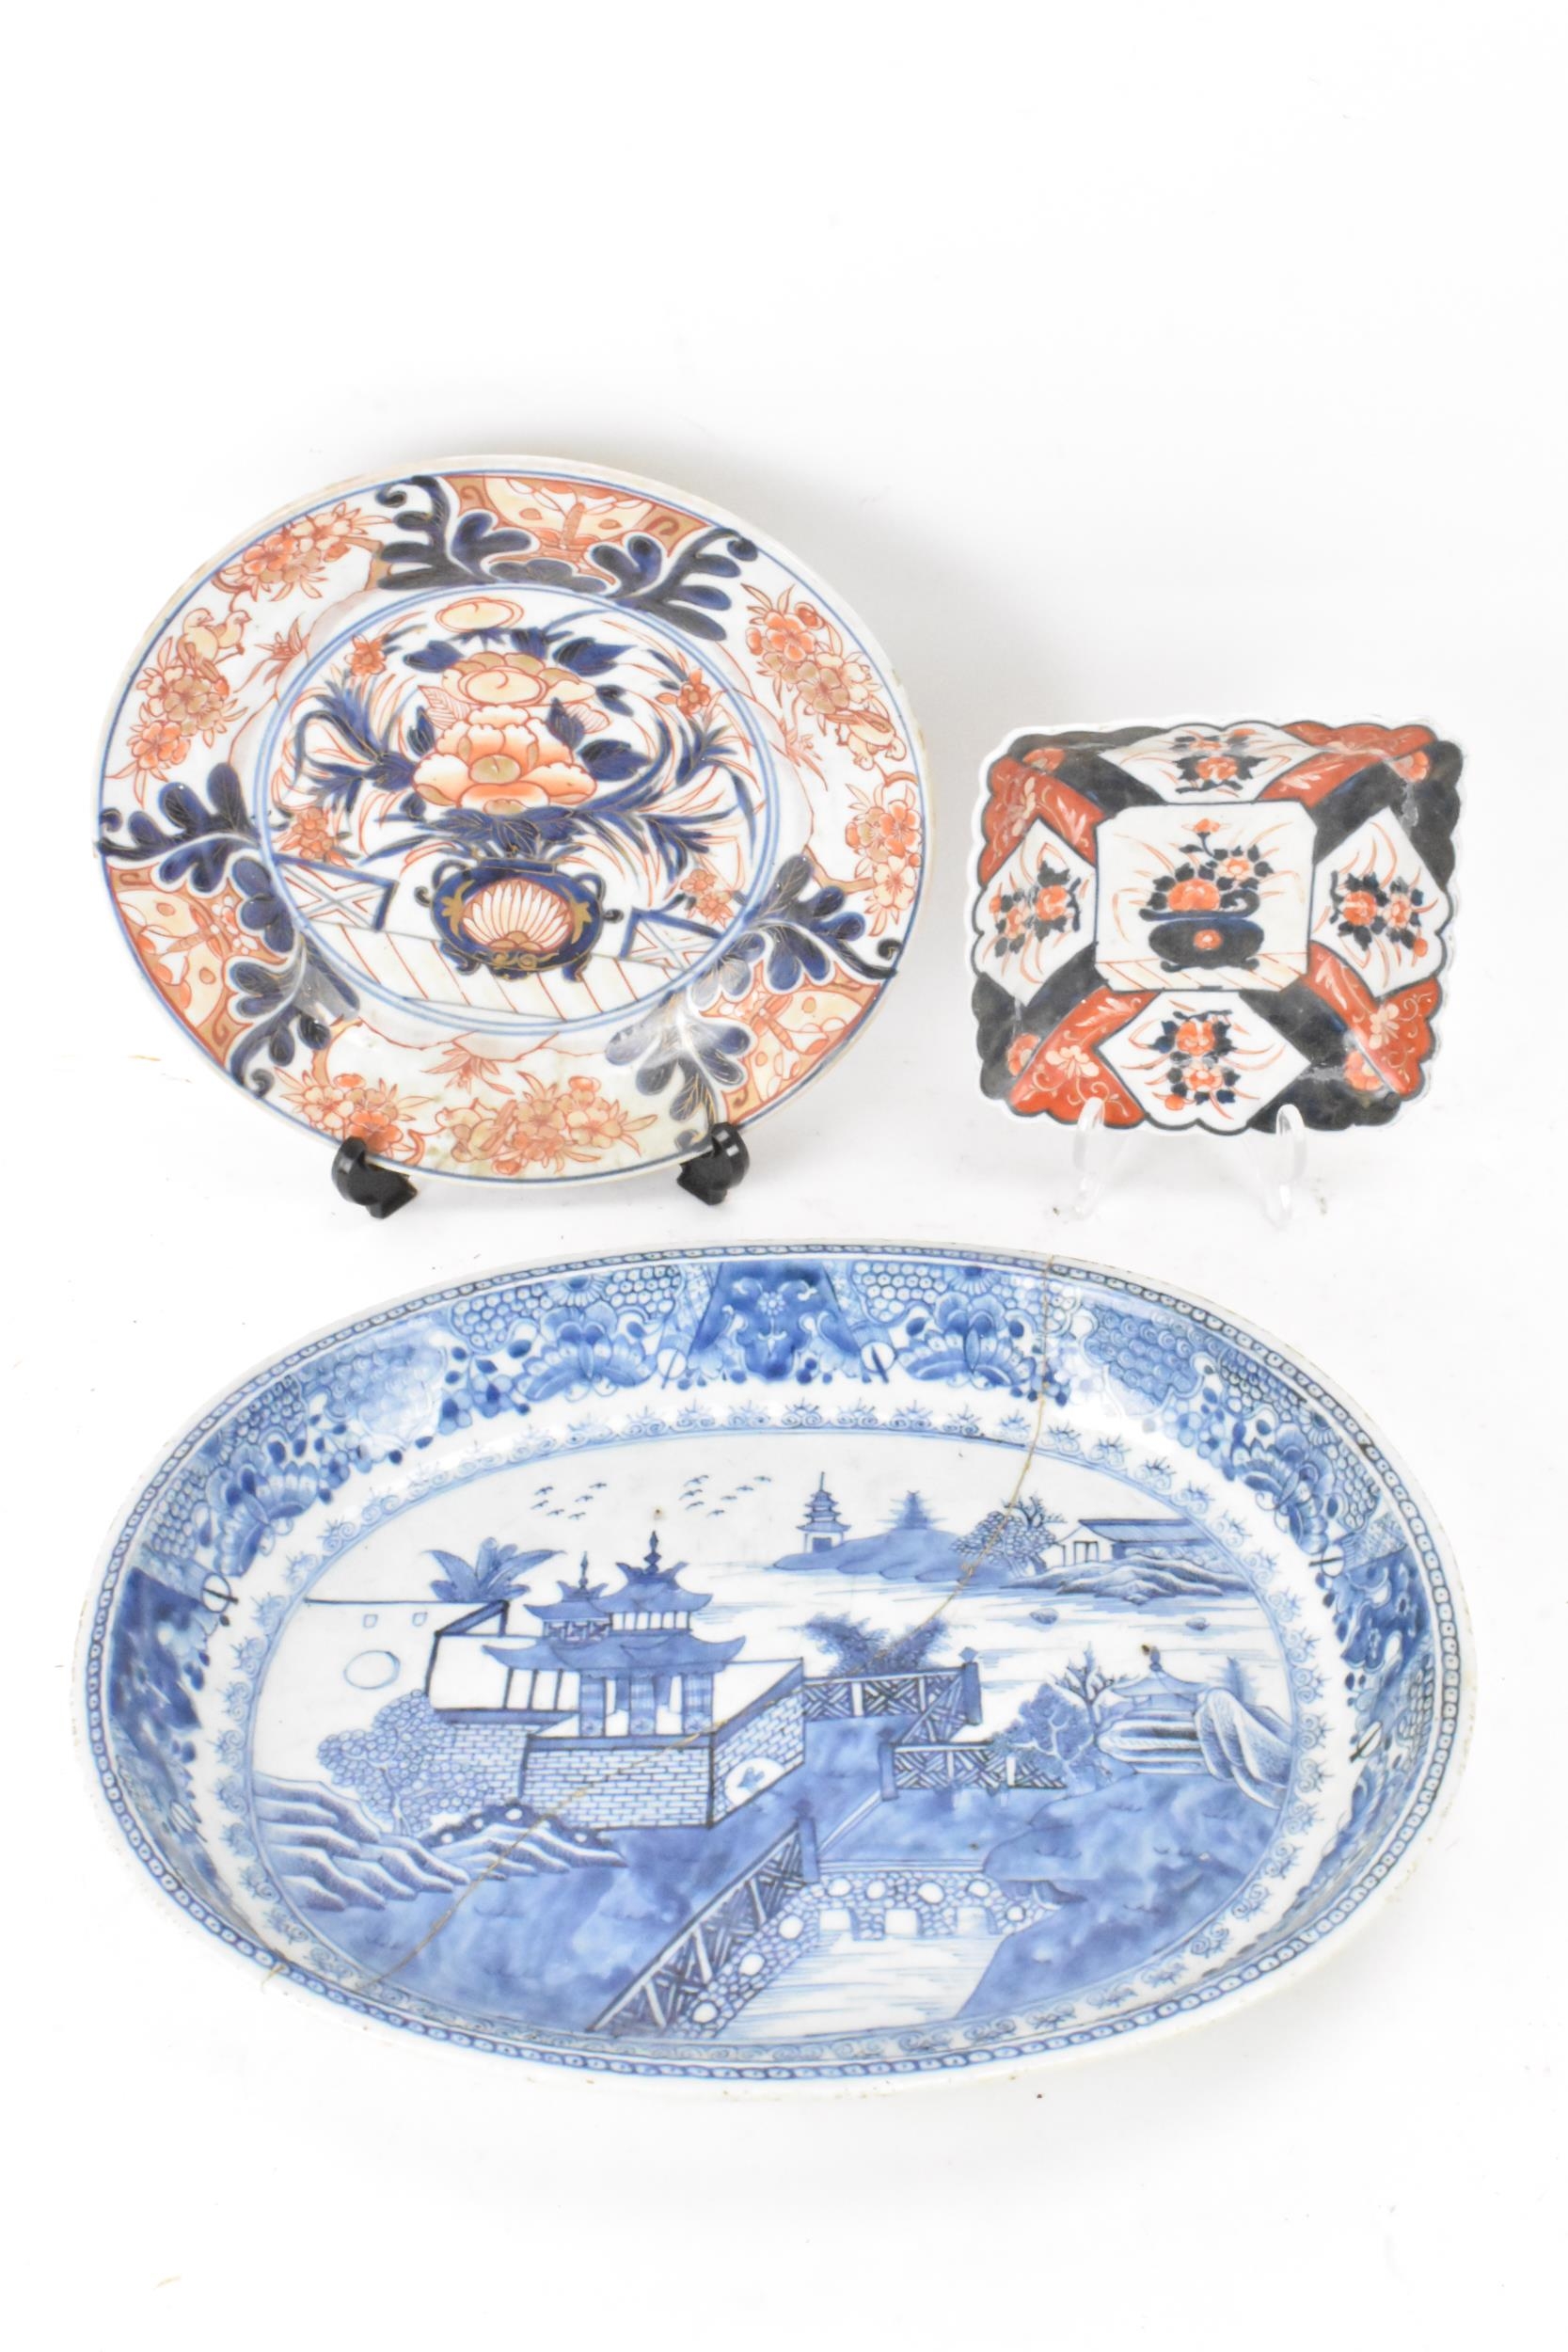 A Chinese export, 18th century, Qianlong period blue and white oval formed dish, decorated with a